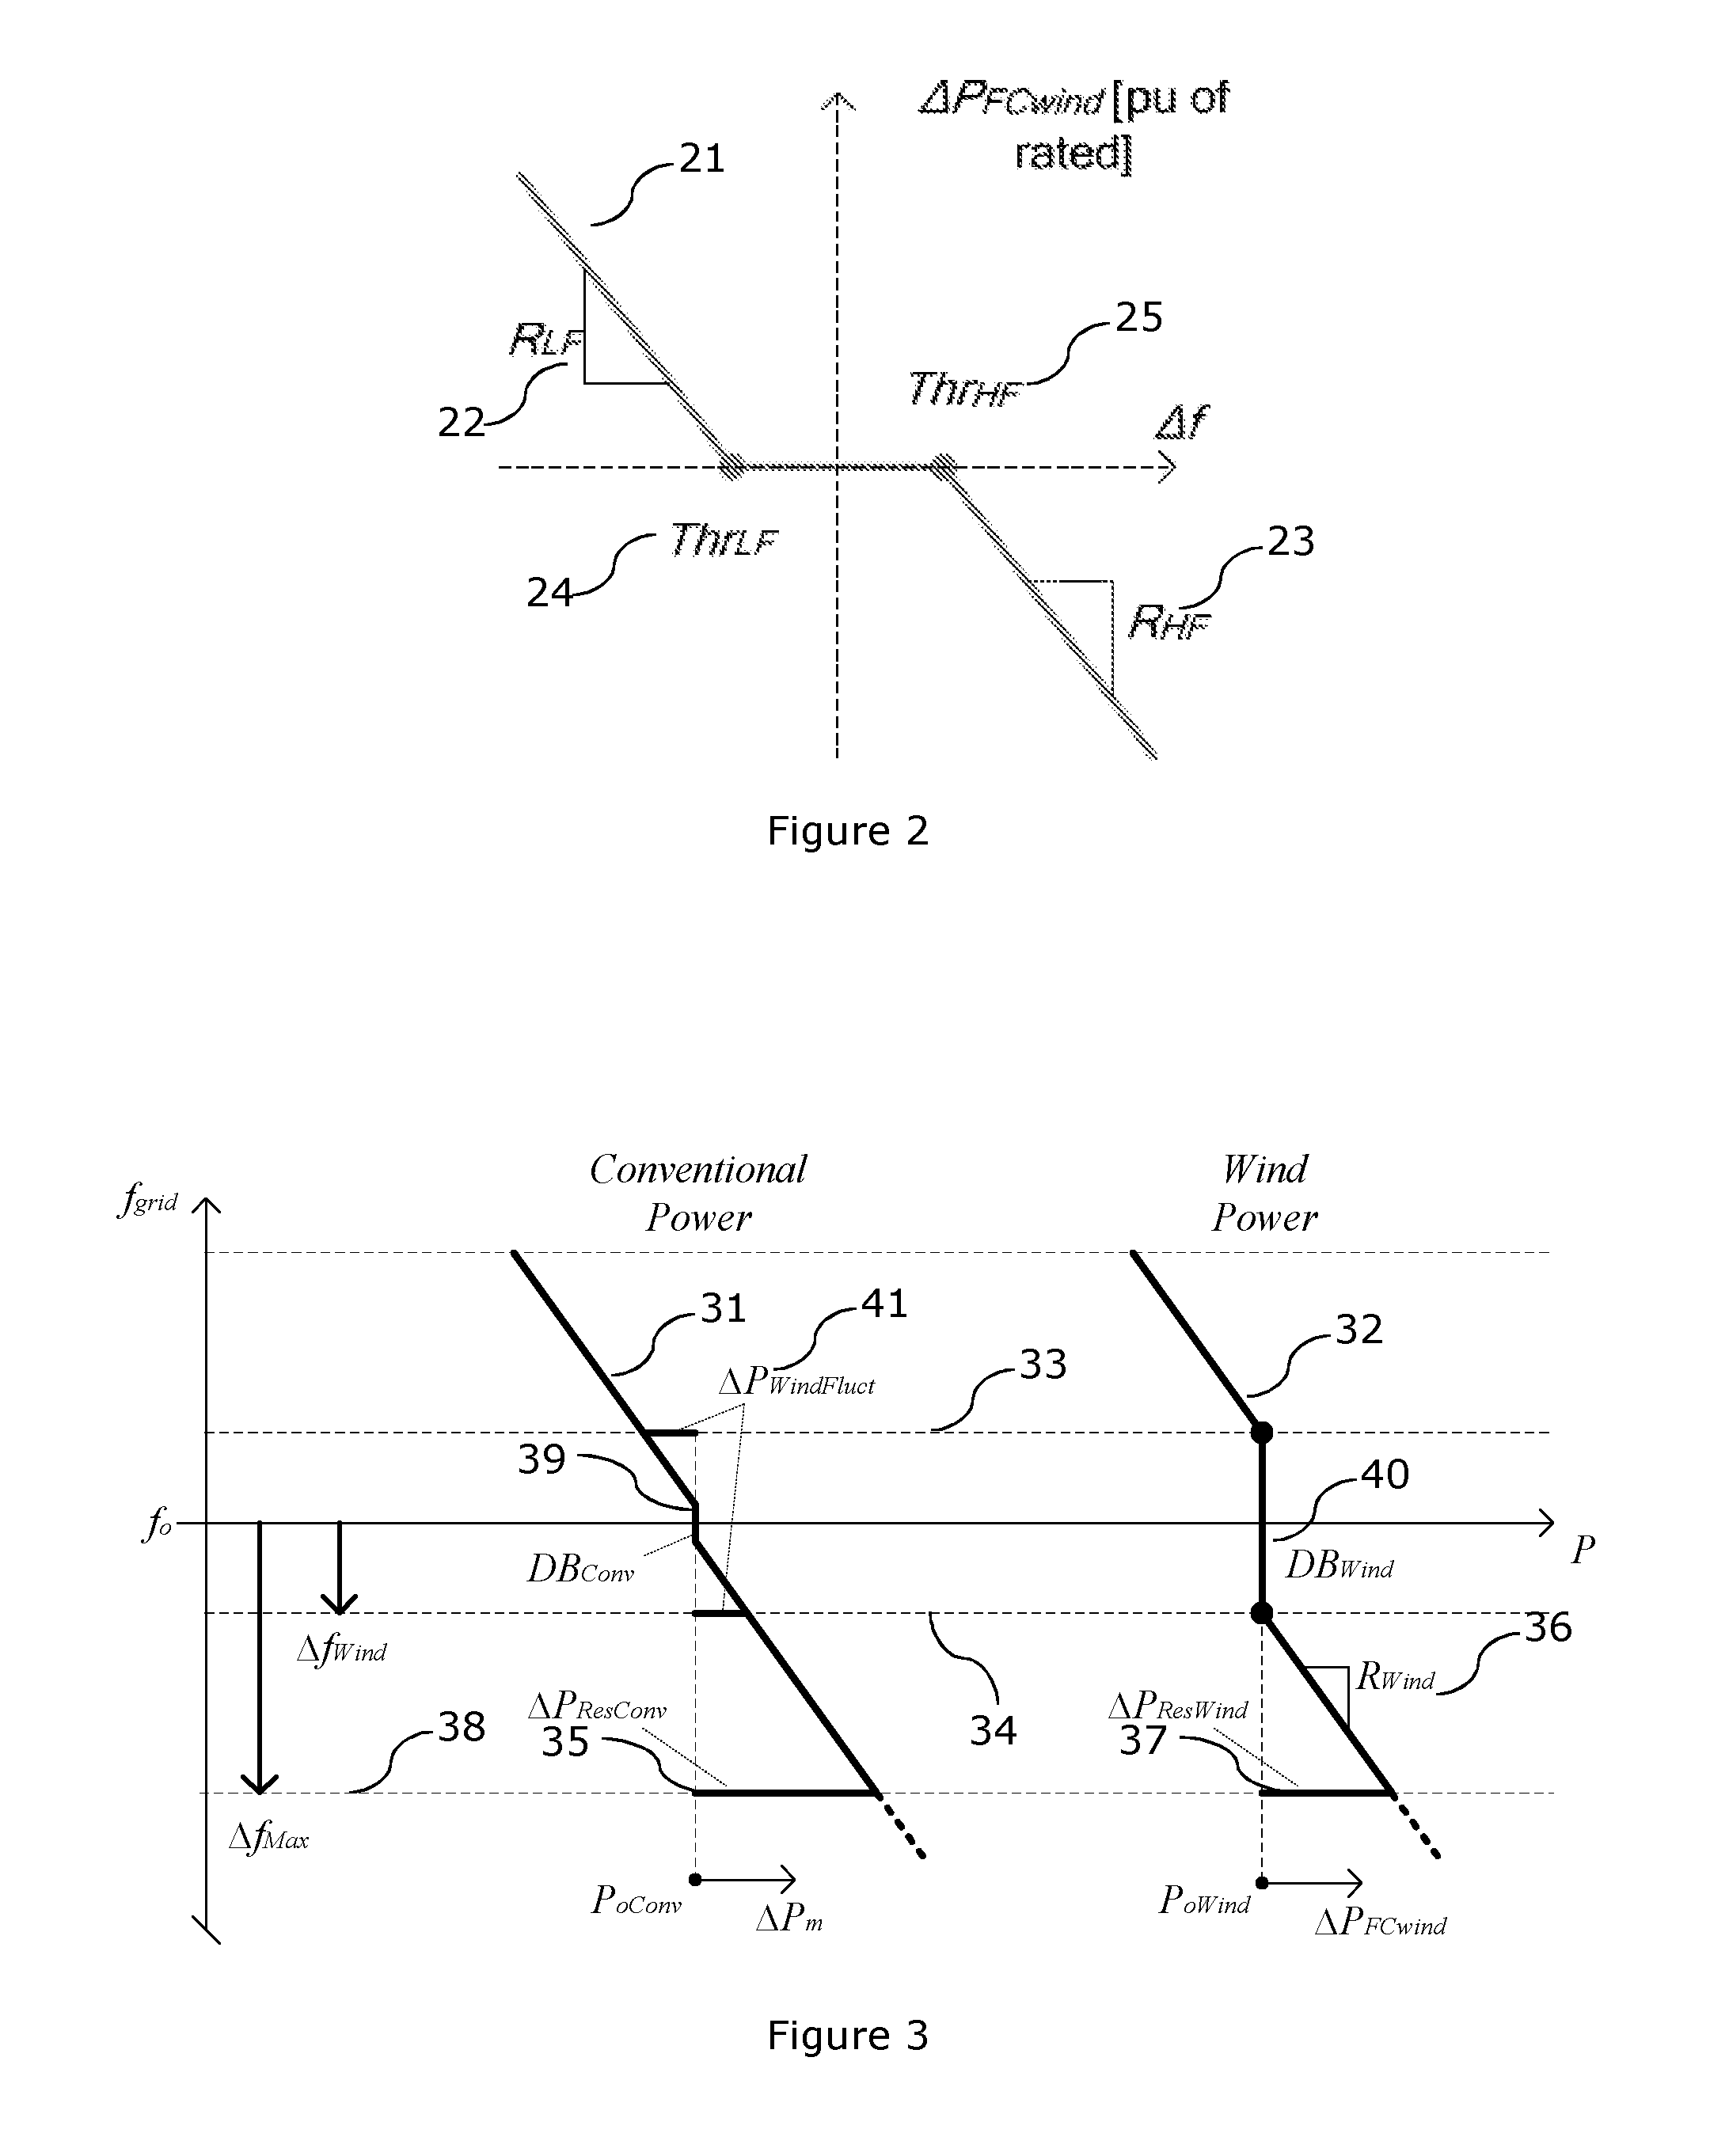 Method for coordinating frequency control characteristics between conventional plants and wind power plants